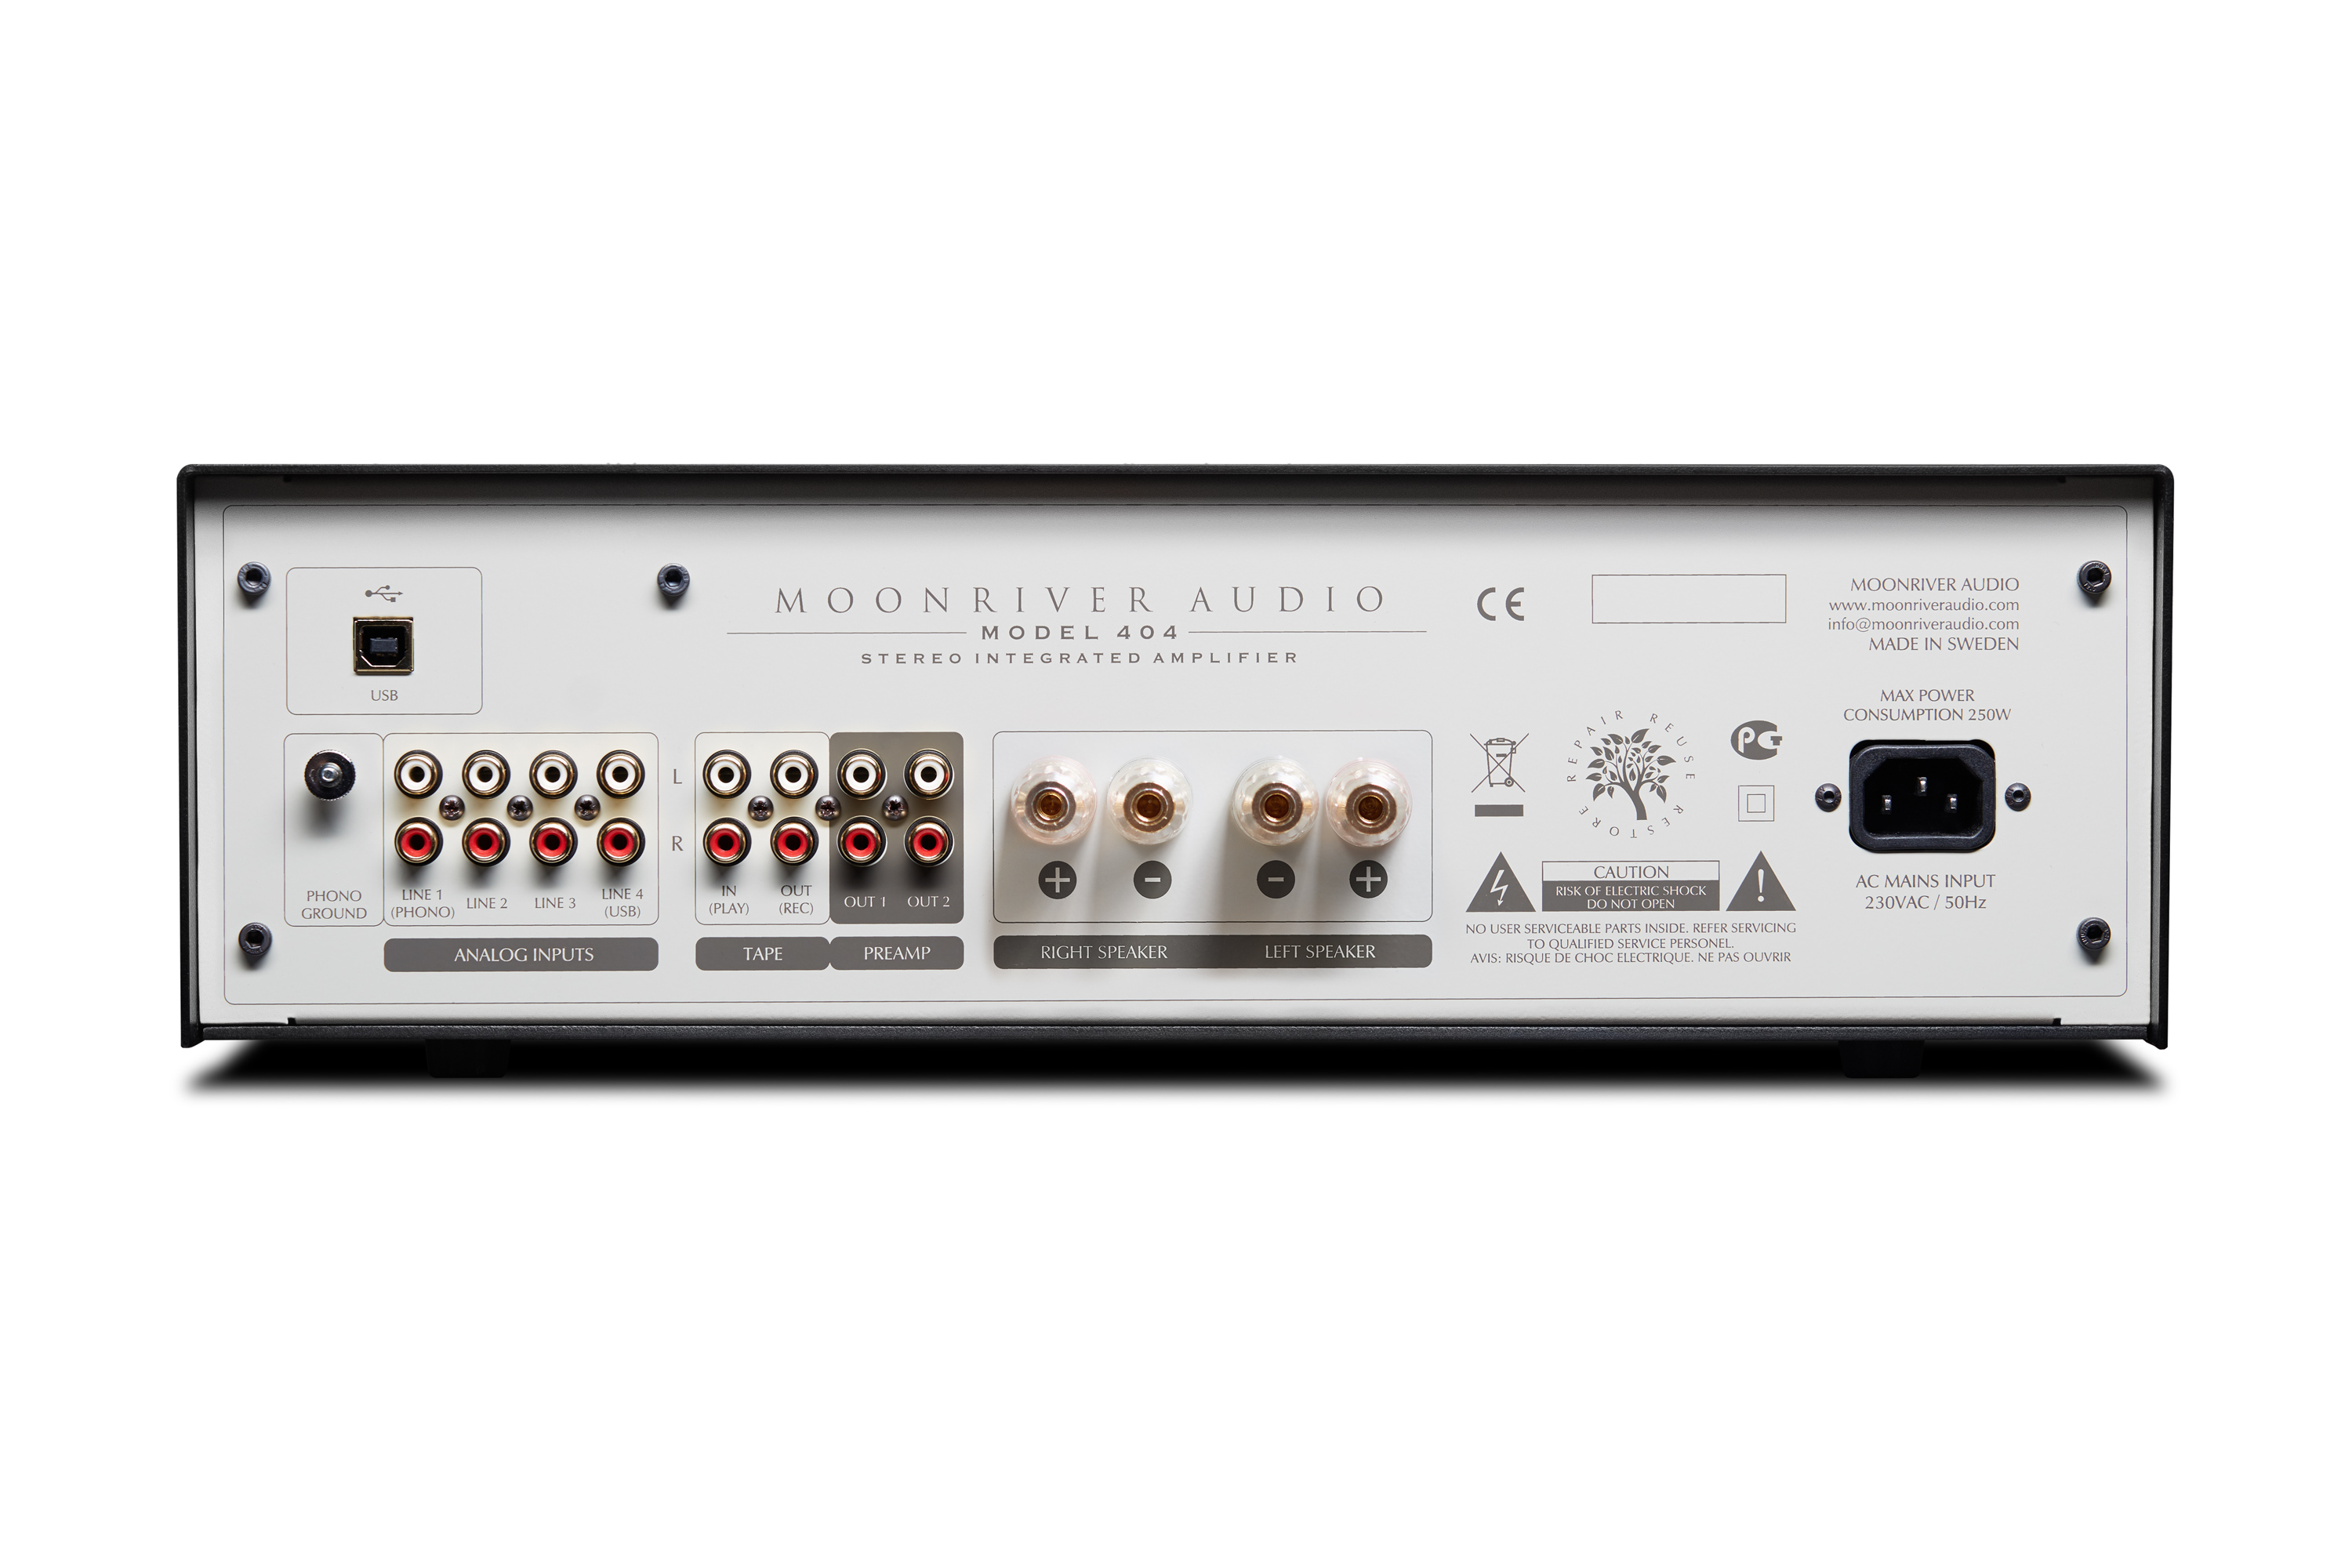 Moonriver Audio The 404 integrated amplifier